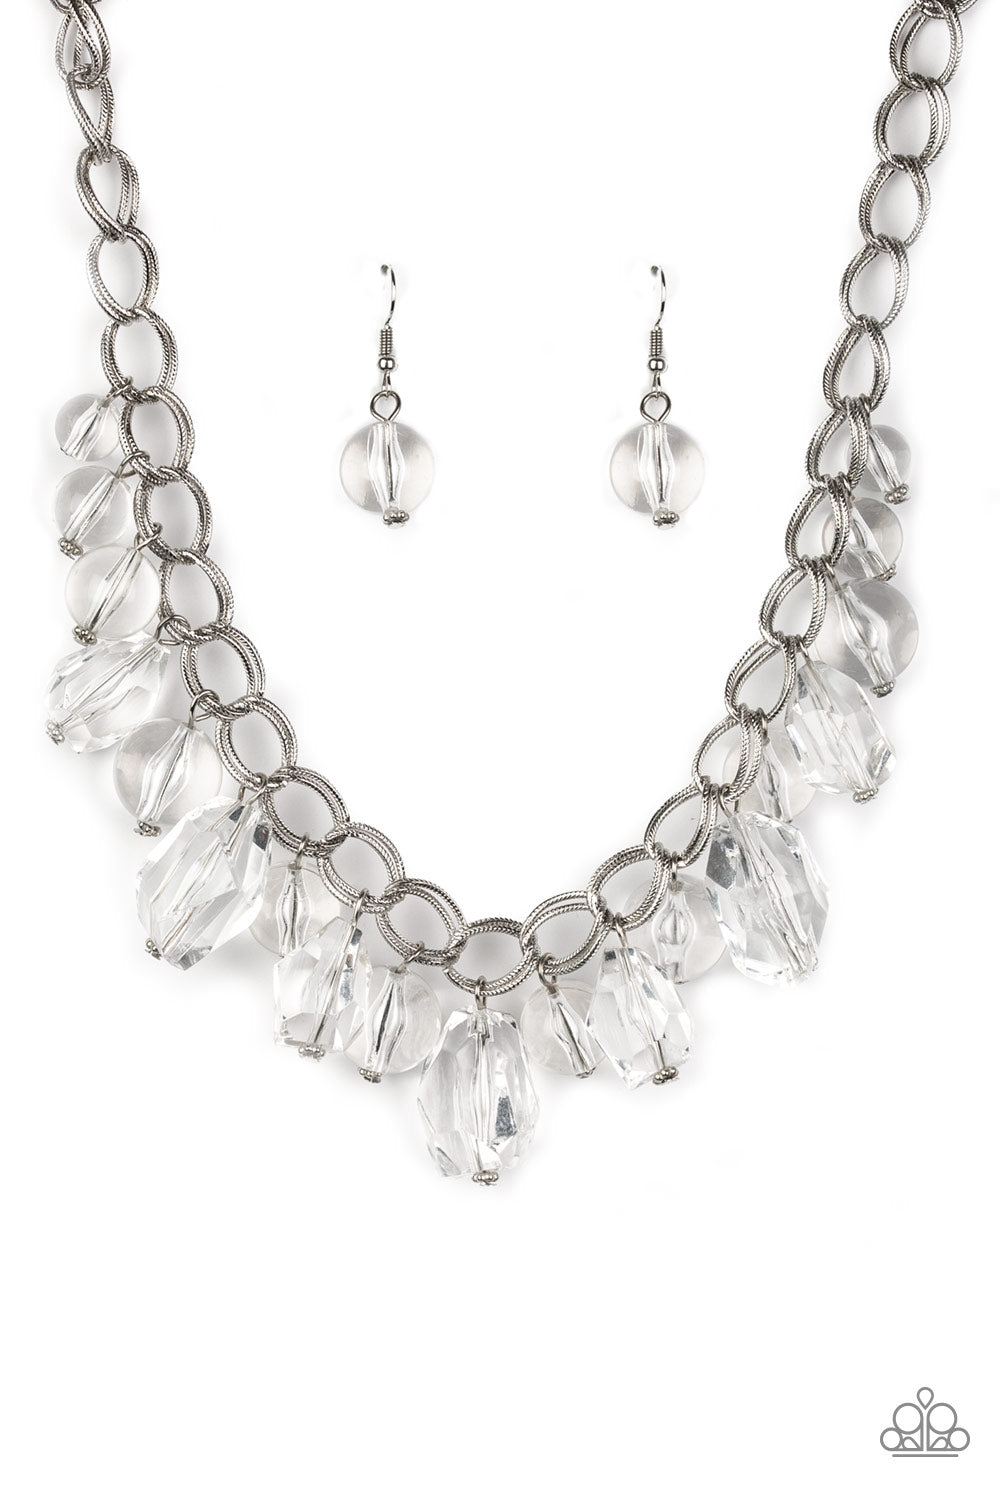 Paparazzi Accessories - Gorgeously Globetrotter - White Necklace - TheMasterCollection